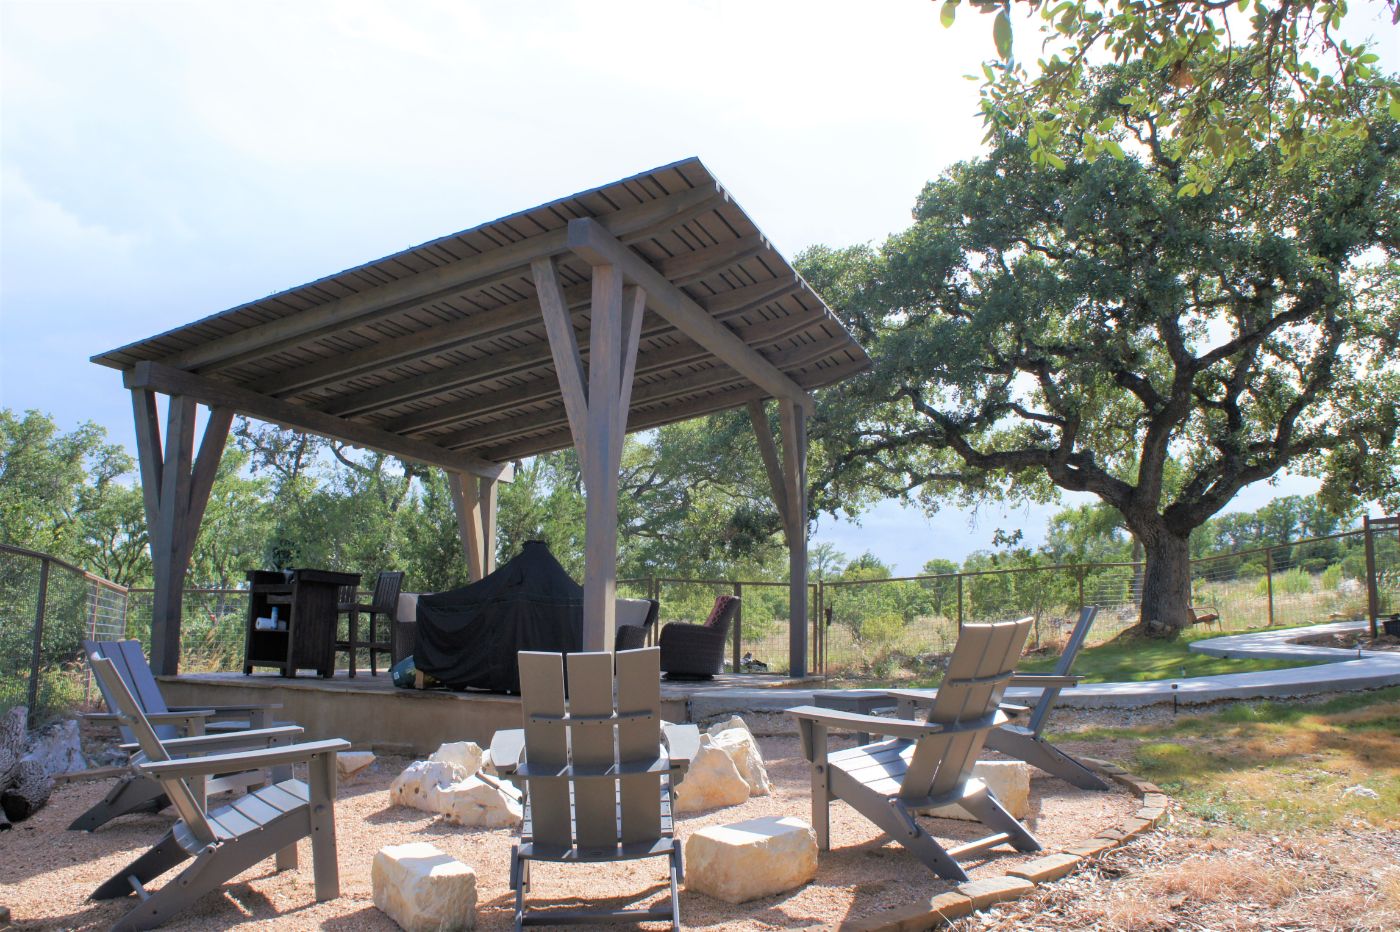 23x21, modern, heavy timbers, cement or concrete pad, Boerne, Kerrville, Fredericksburg, pre fab, pavilion kit, free standing pavilion, timber frame pavilion, hill country pavilion, wood pavilion, shade structure, post and beam